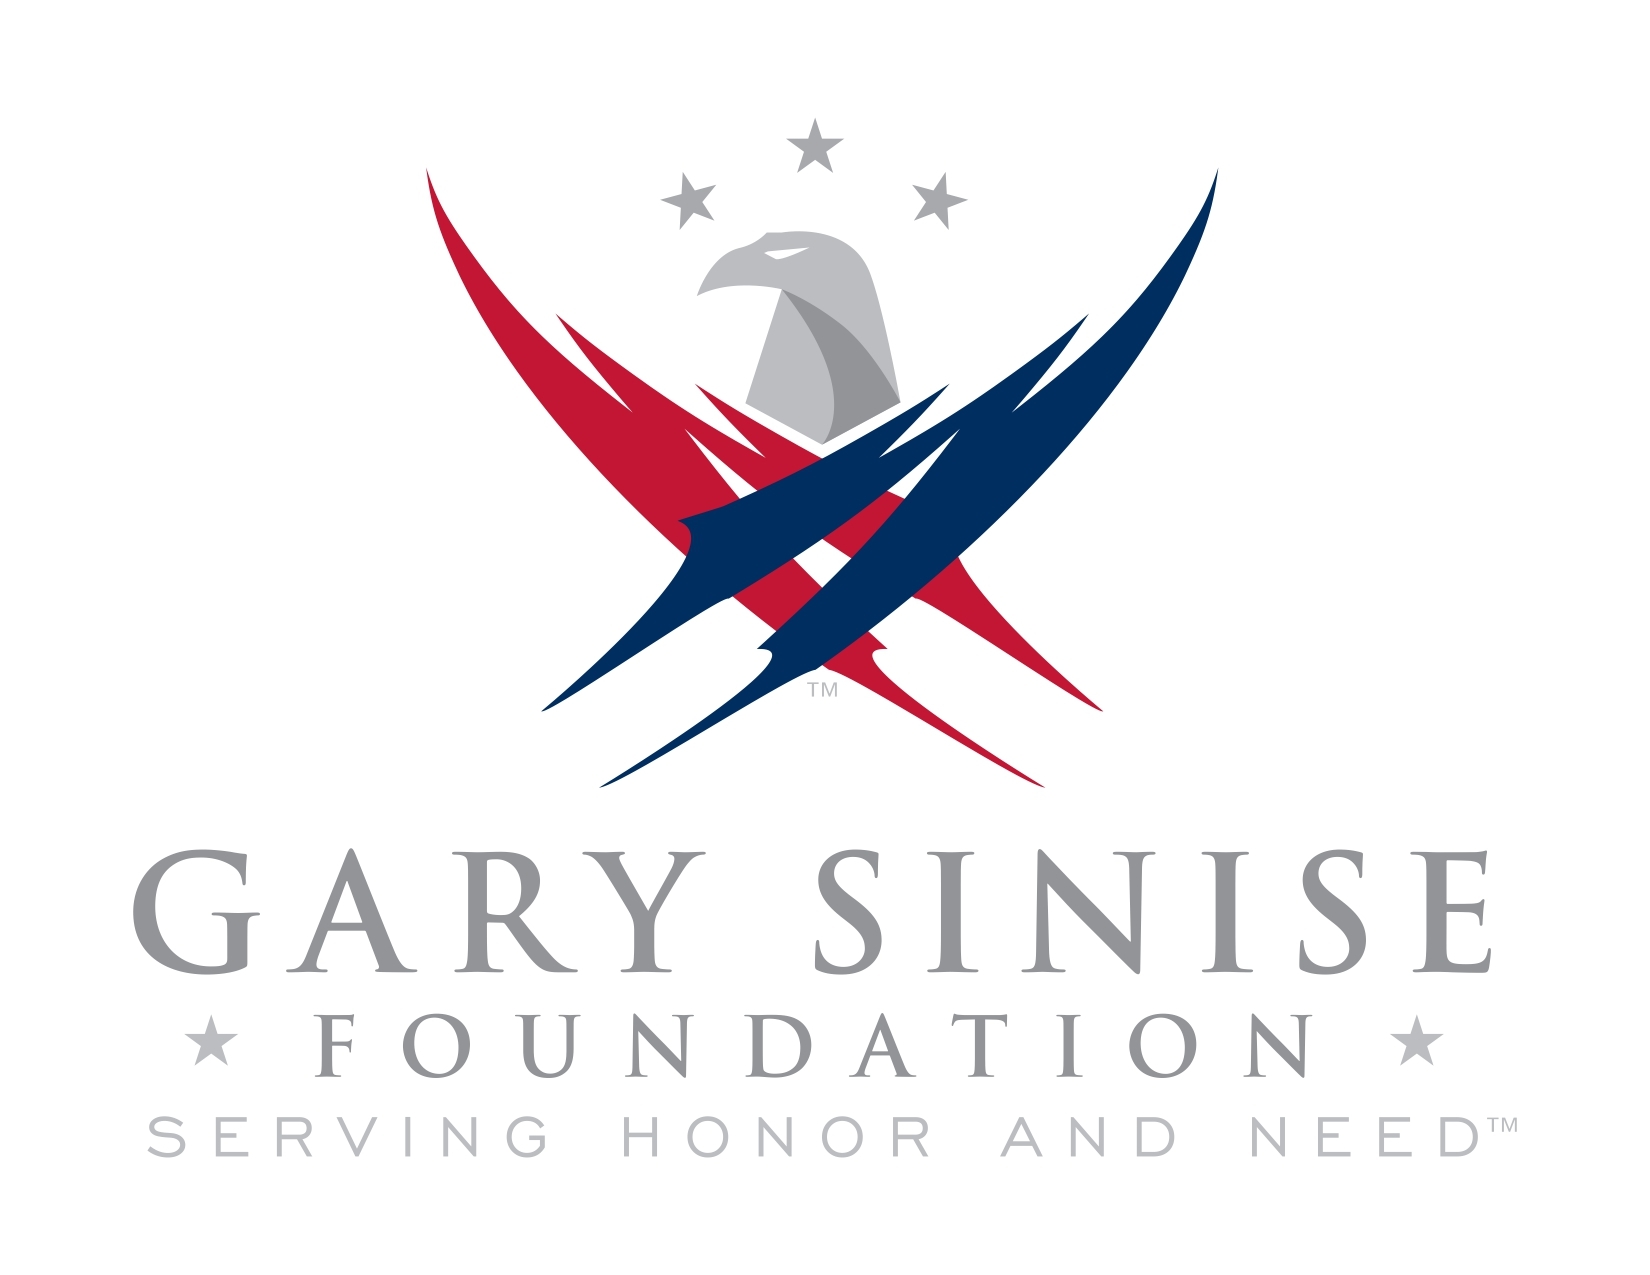 Gary Sinise Foundation: Serving Honor and Need